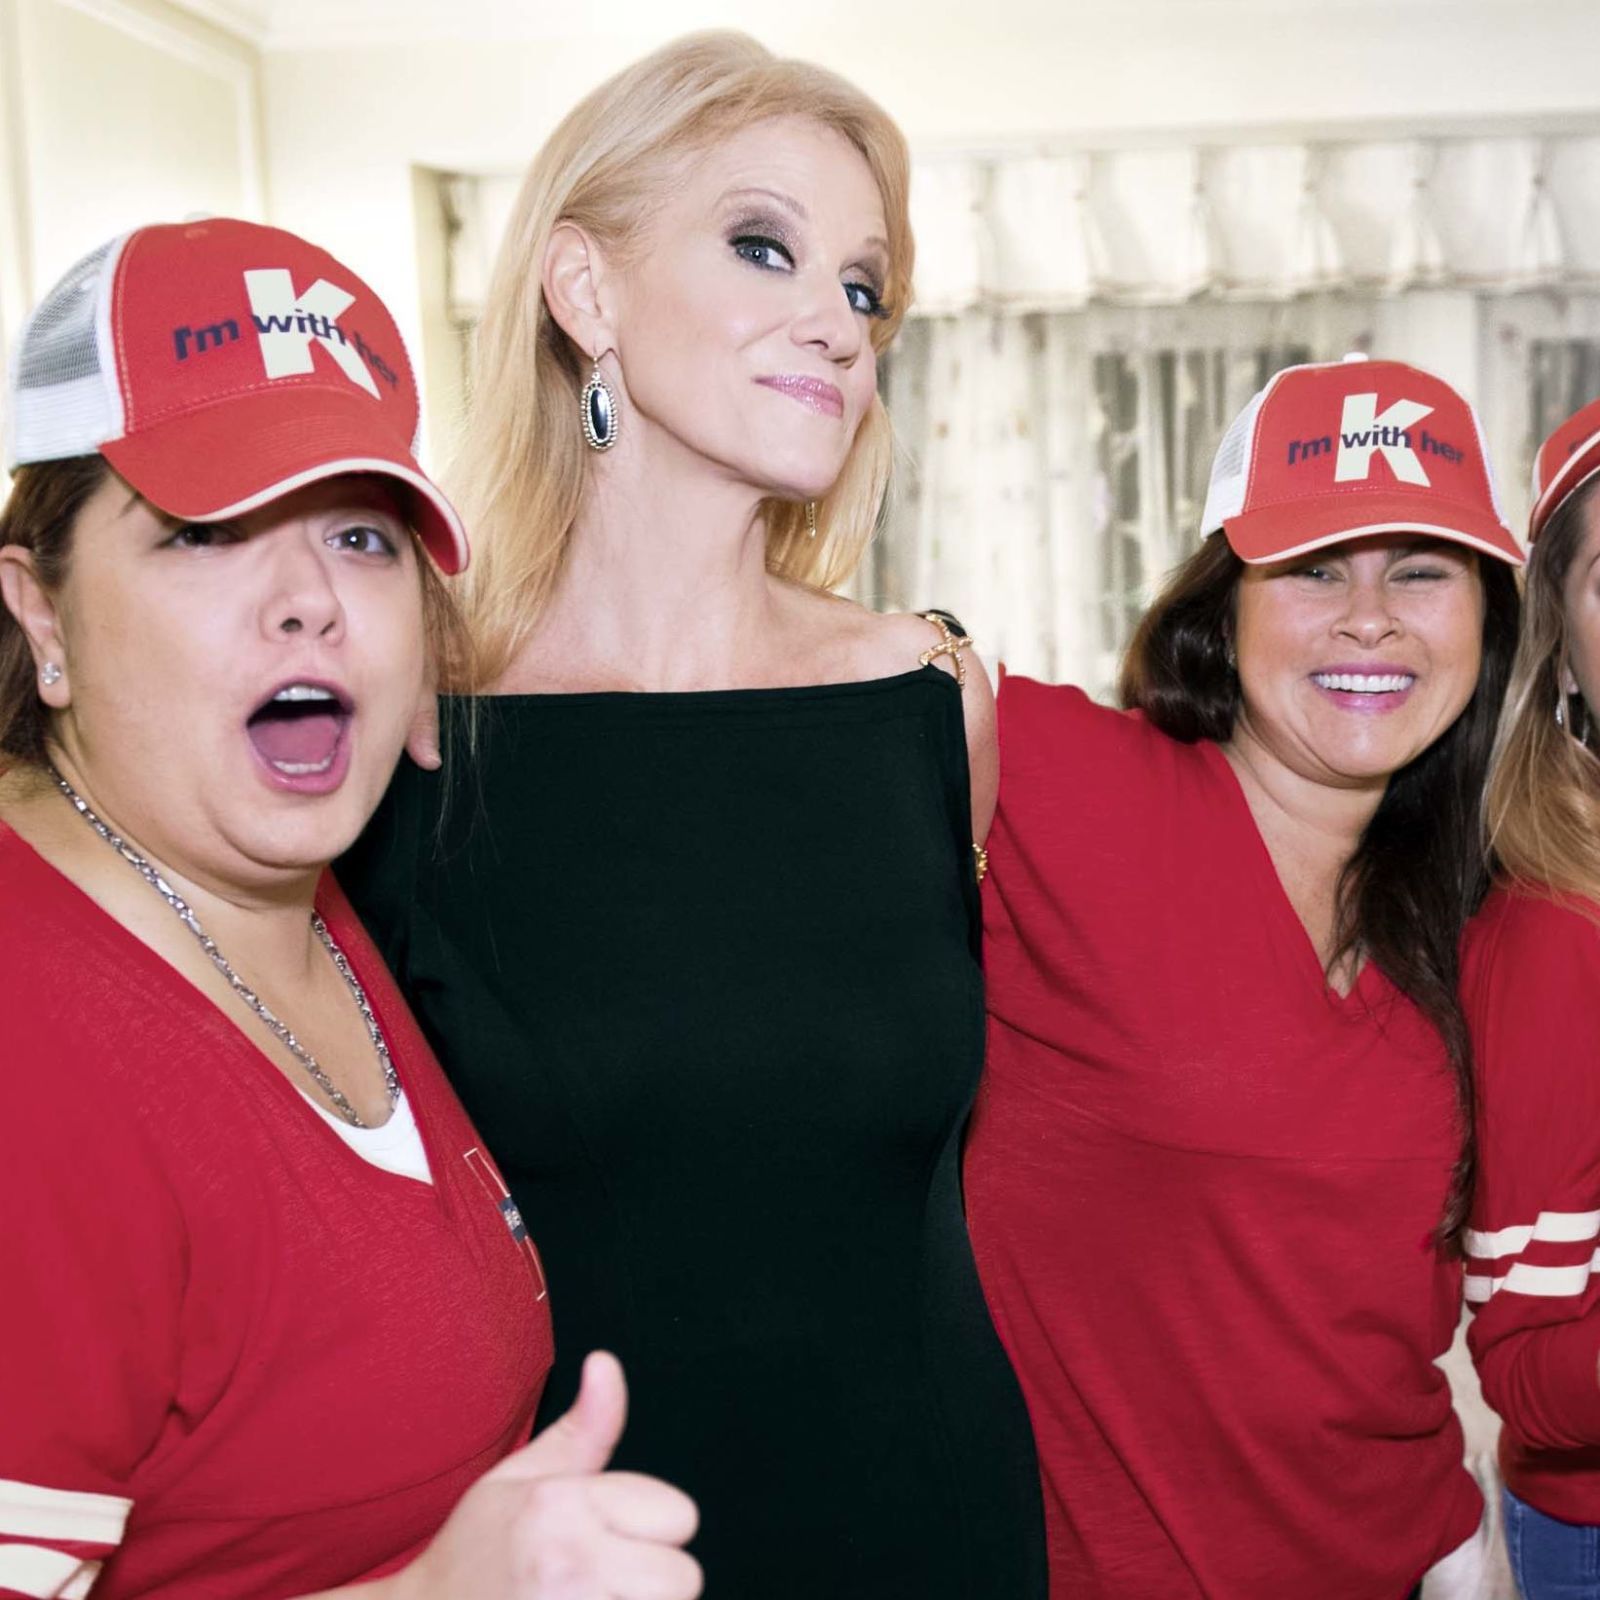 Kellyanne Conway with supporters